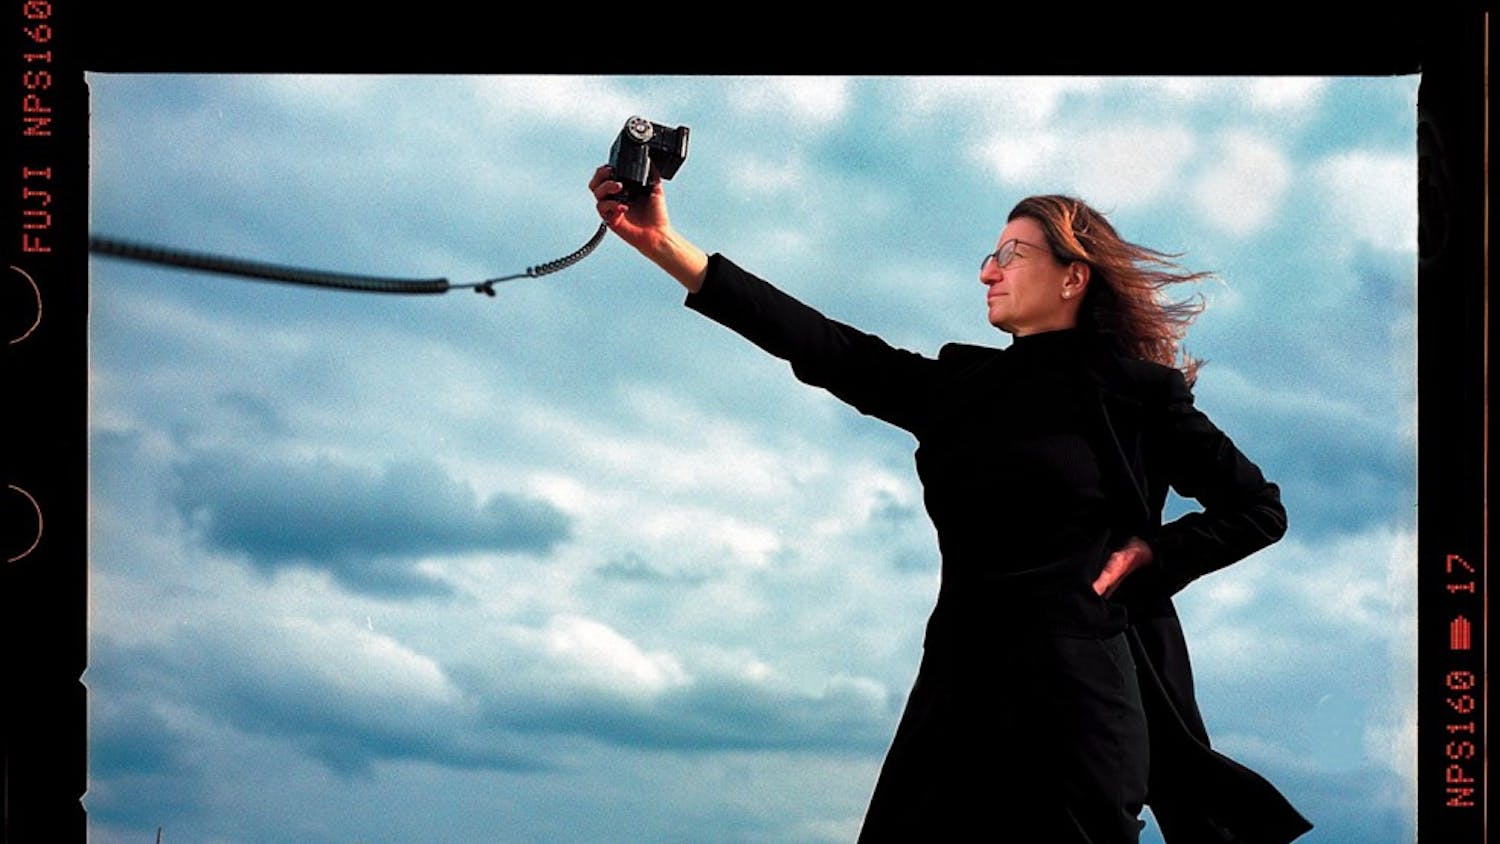 KRT BOOKS STORY SLUGGED: LEIBOVITZ KRT PHOTOGRAPH BY CHARLES TRAINOR, JR/MIAMI HERALD (SUN-SENTINEL, SOUTH FLORIDA OUT) (KRT12- January 12) Annie Leibovitz holds the photographers' strobe on a sand dune on South Beach. Her most famous phoographs are of famously rich people, but she is a chicken-soup kind of woman who gets nervous when she's on the other end of the lens. (MI) AP PL KD (Sq) (lde) -- NO MAGS, NO SALES --